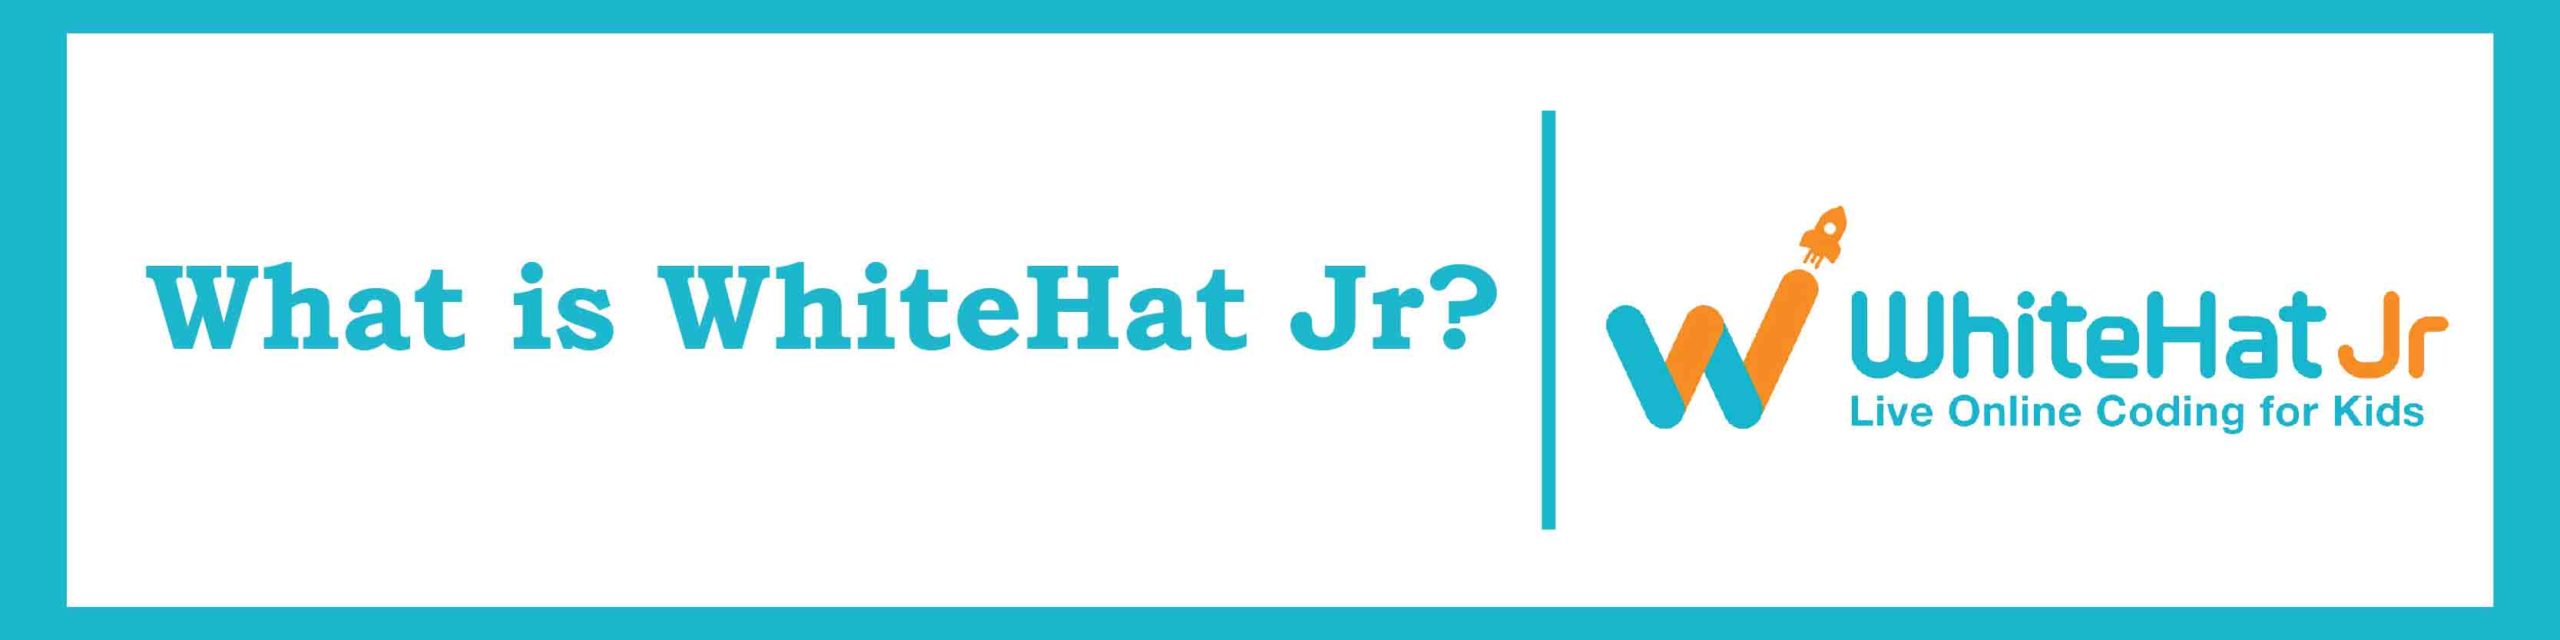 What is WhiteHat Jr